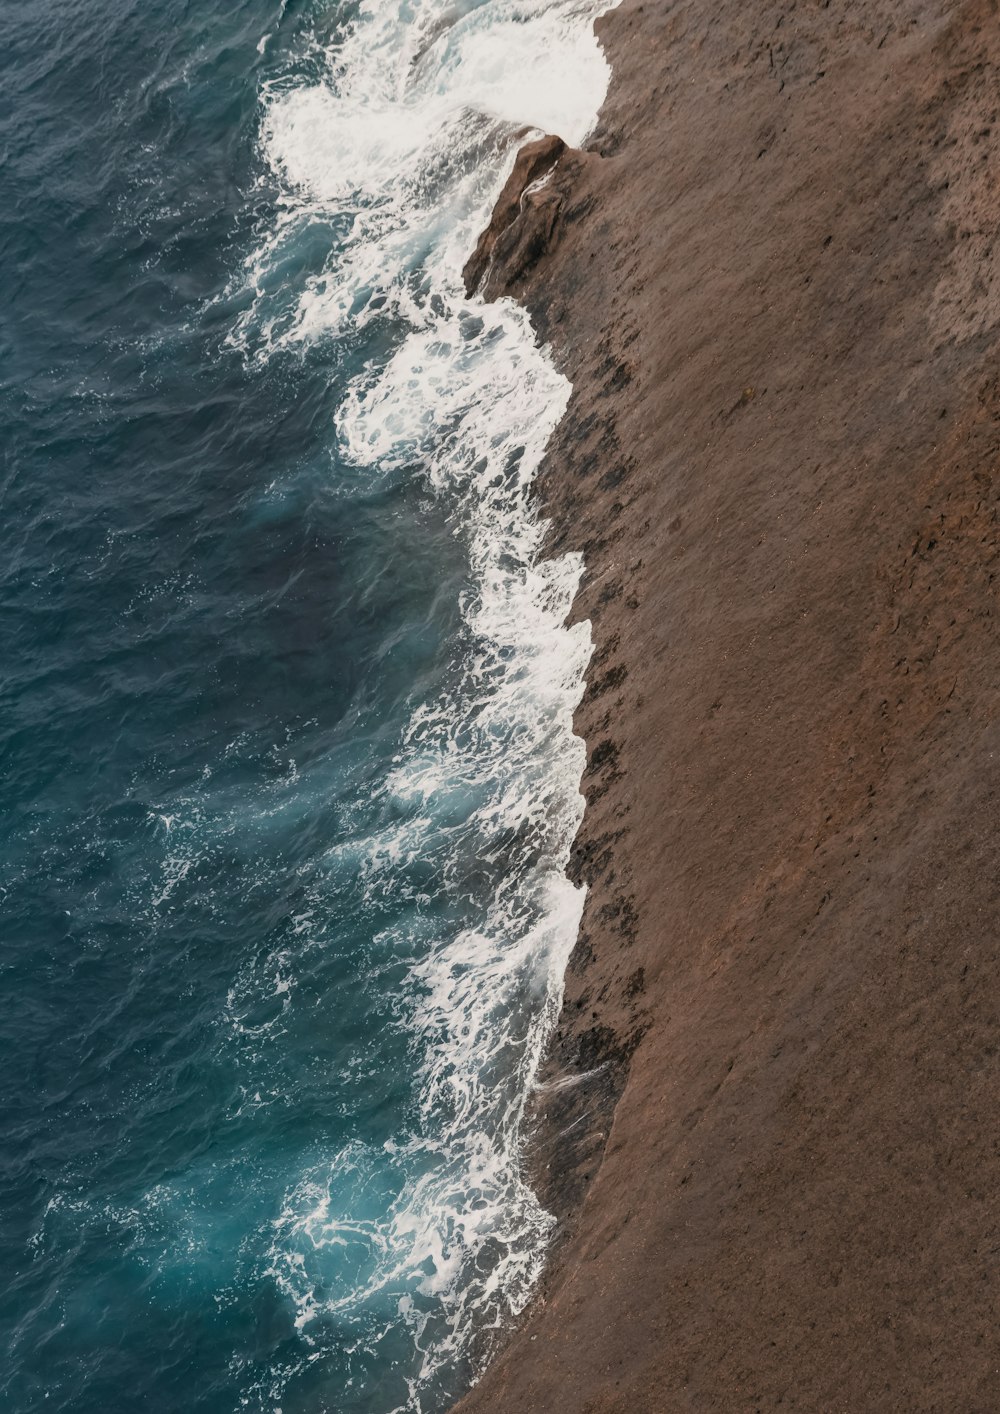 a bird is perched on the edge of a cliff by the ocean